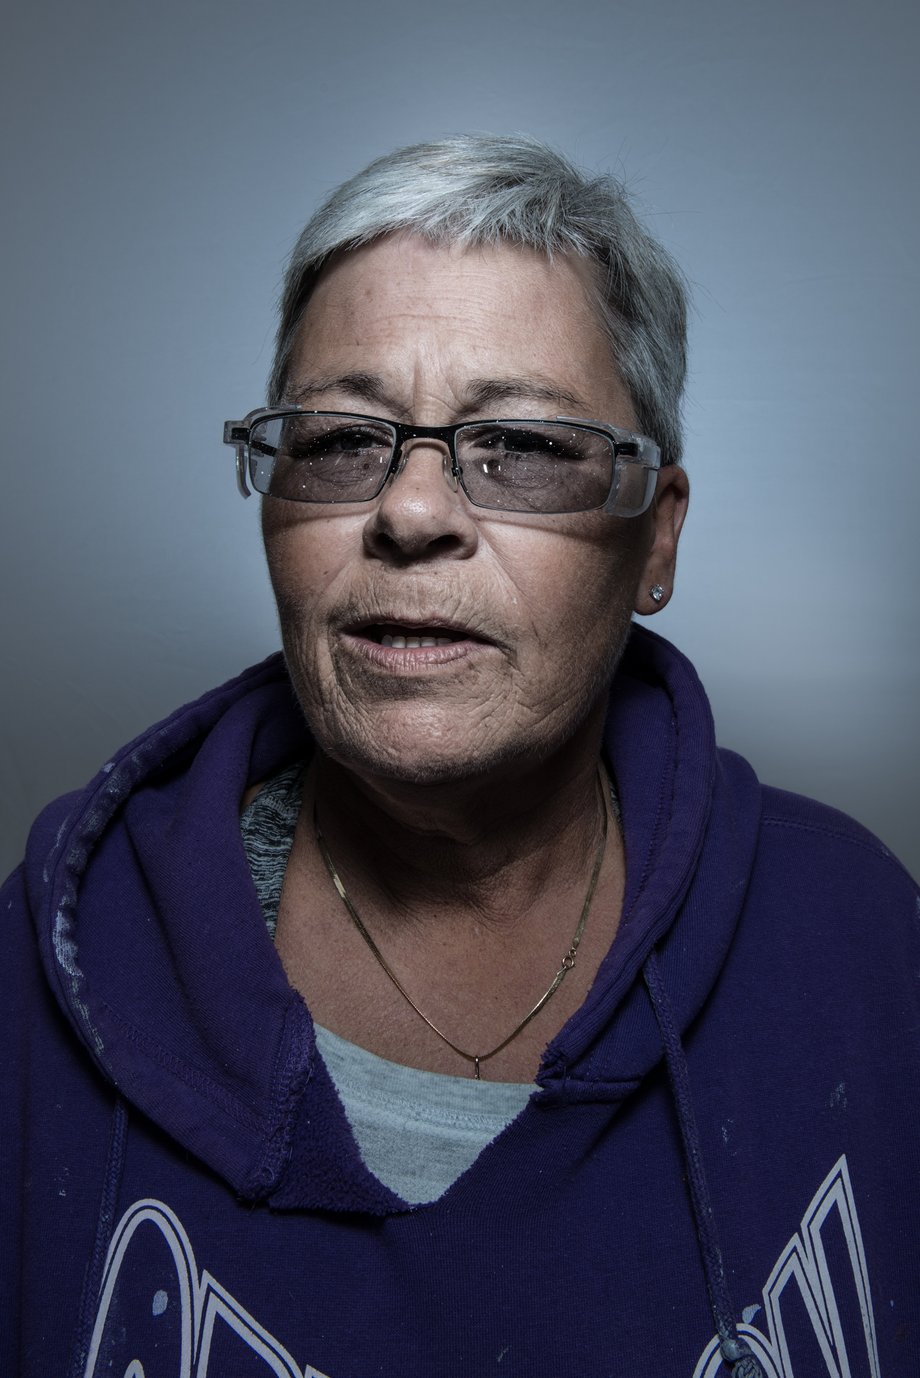 Heather Perry's portrait of Kim, and older woman with short, grey hair in a purple hoodie sweatshirt and glasses